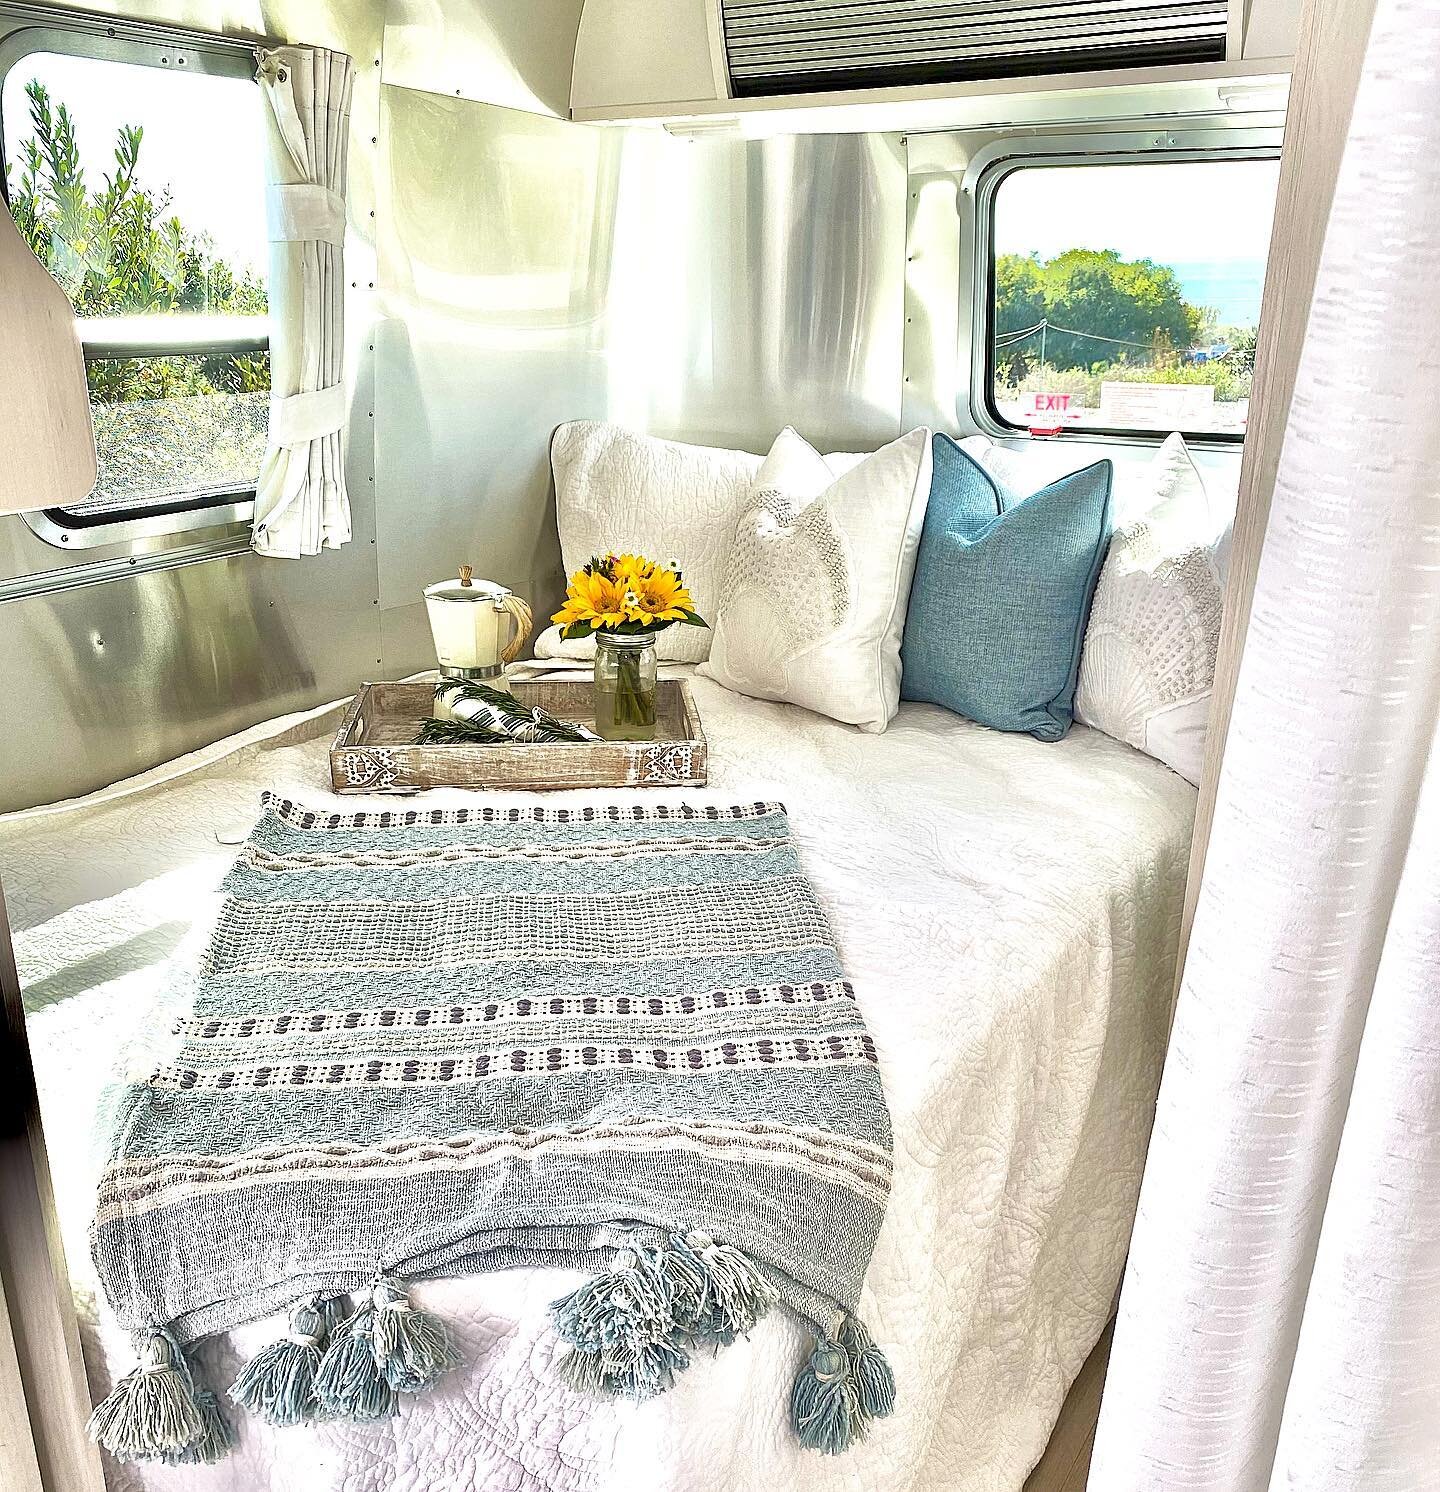 Comfort is a must while you glamping Airstream Bambi Sport 16RB is way to spend a weekend away. #rvshare #outdoorsy #california #californiawilderness #glamping #glampingcalifornia #glampers #glamperscalifornia #glampersca #rvtravel #airstream #travel